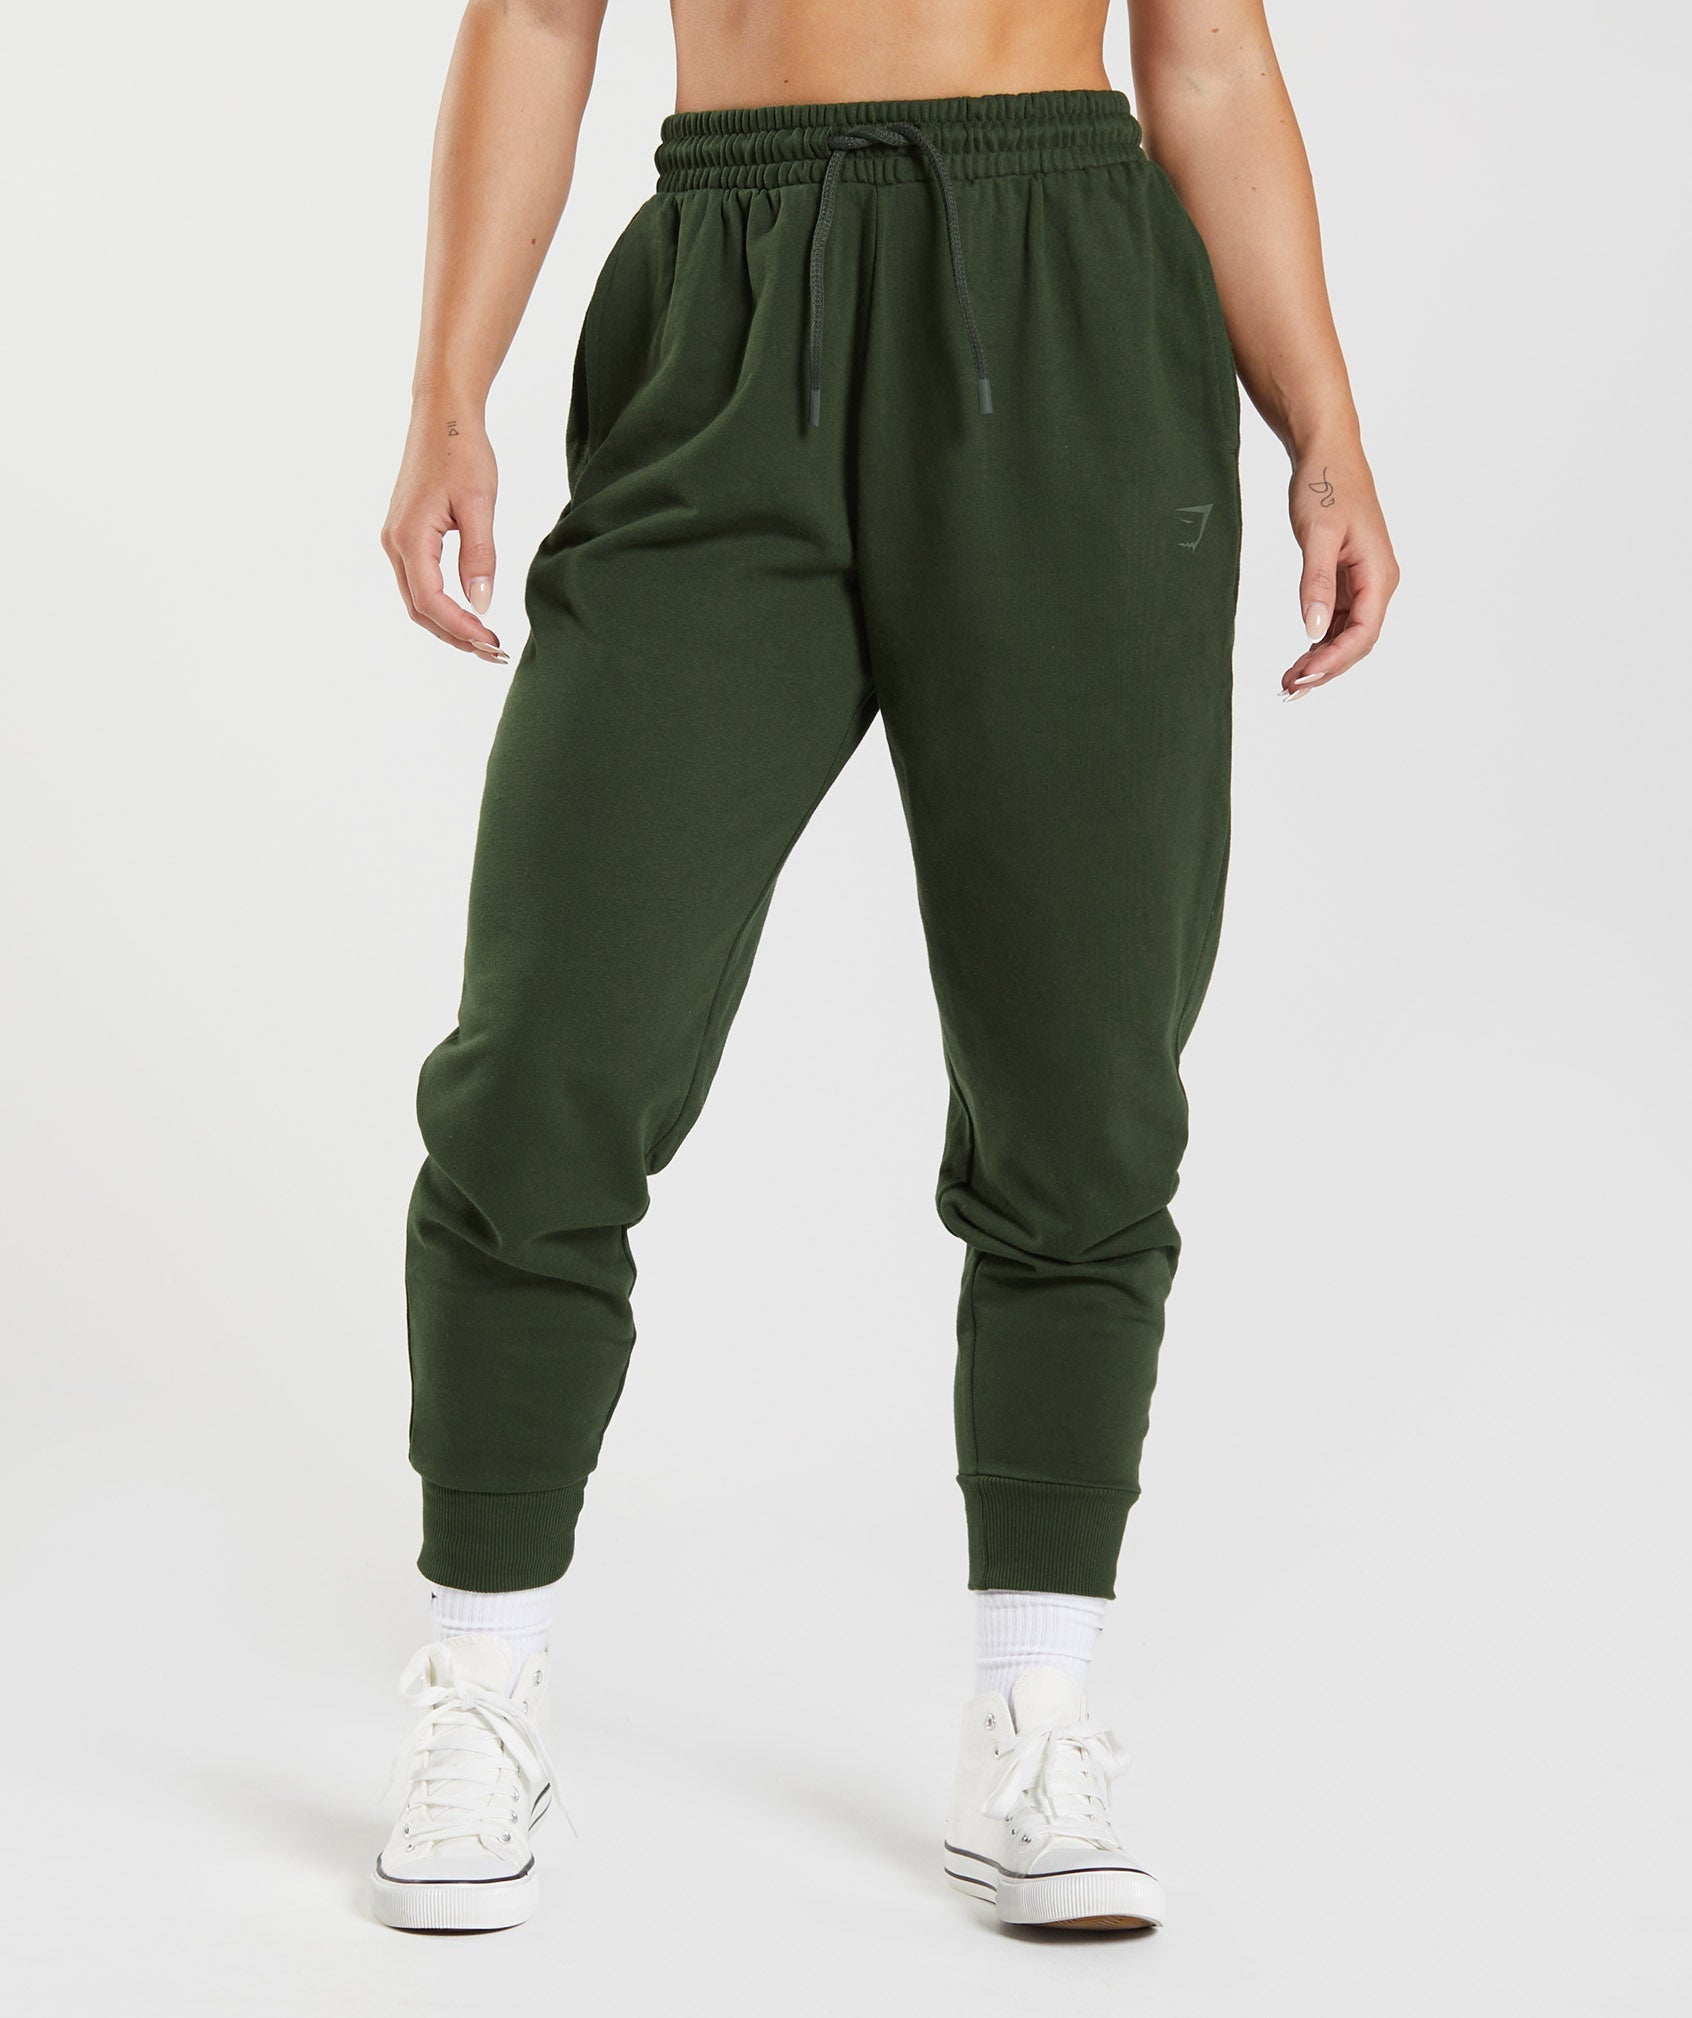 GS Power Joggers in Moss Olive